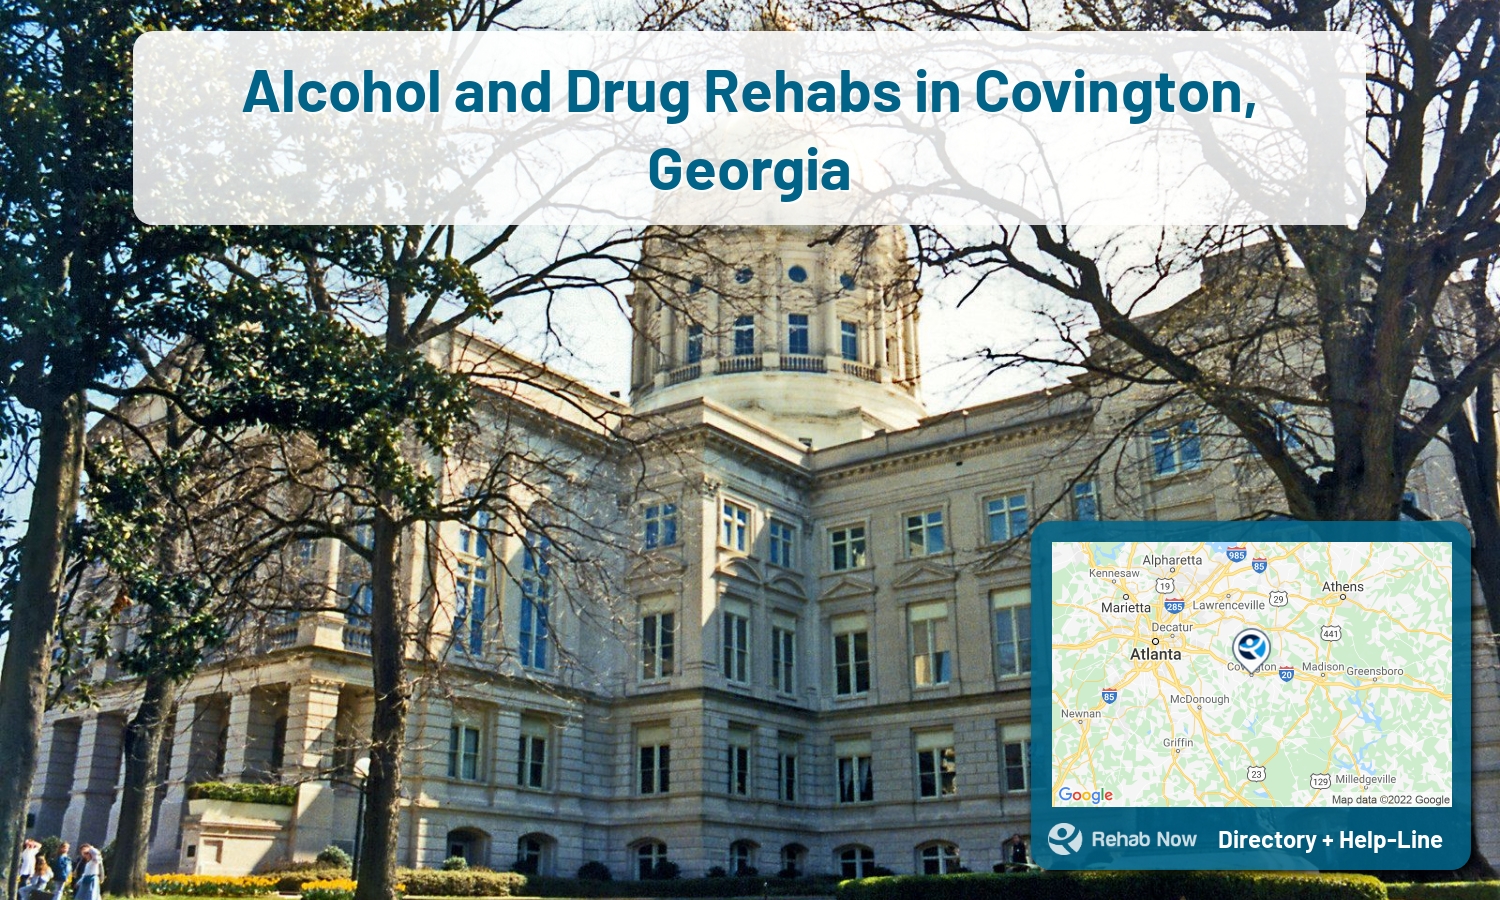 View options, availability, treatment methods, and more, for drug rehab and alcohol treatment in Covington, Georgia